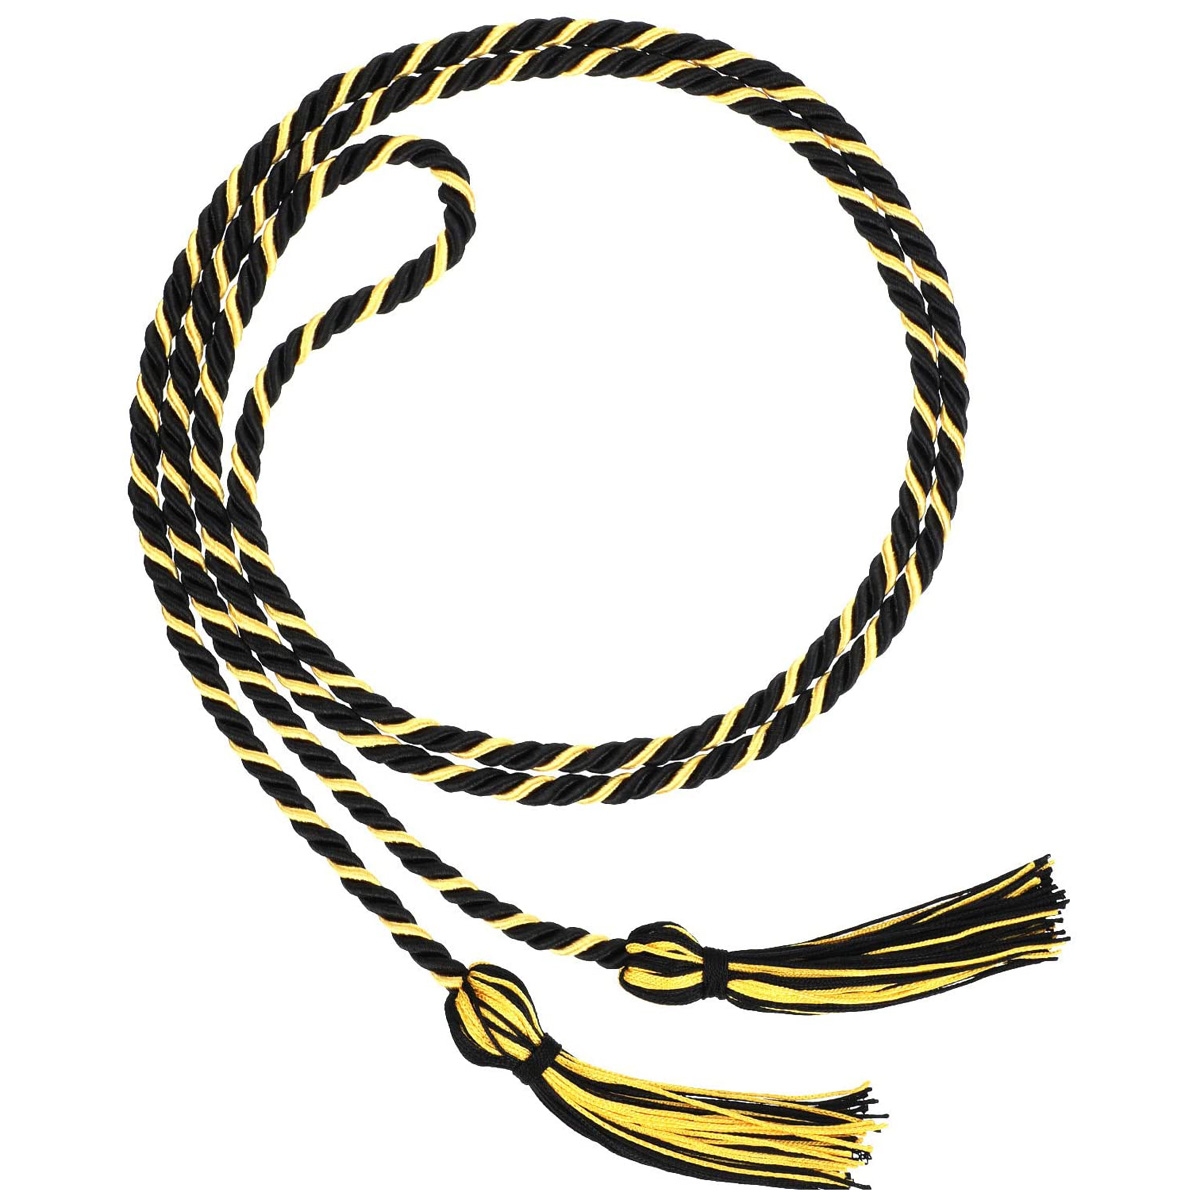 Tassels Cord Polyester Yarn Honor Cord for Bachelor Gown for Graduation Students (Black with Gold)